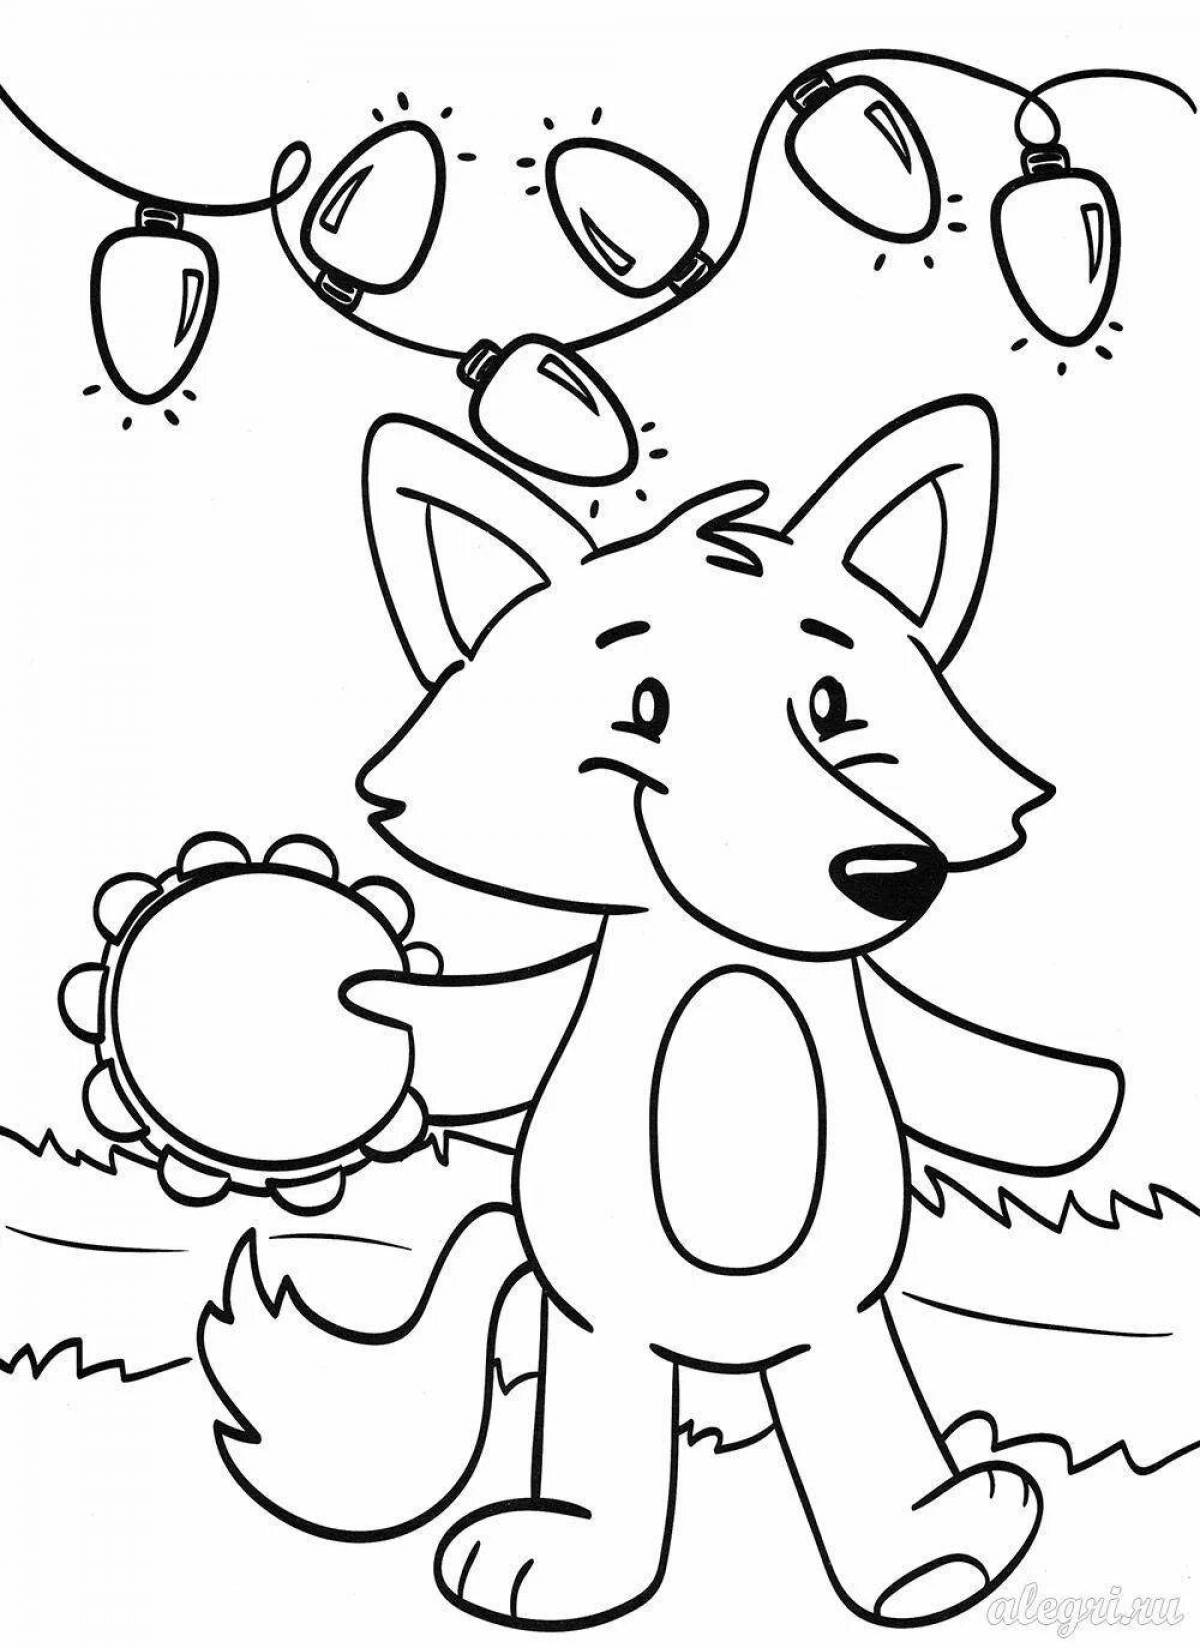 Festive Christmas wolf coloring book